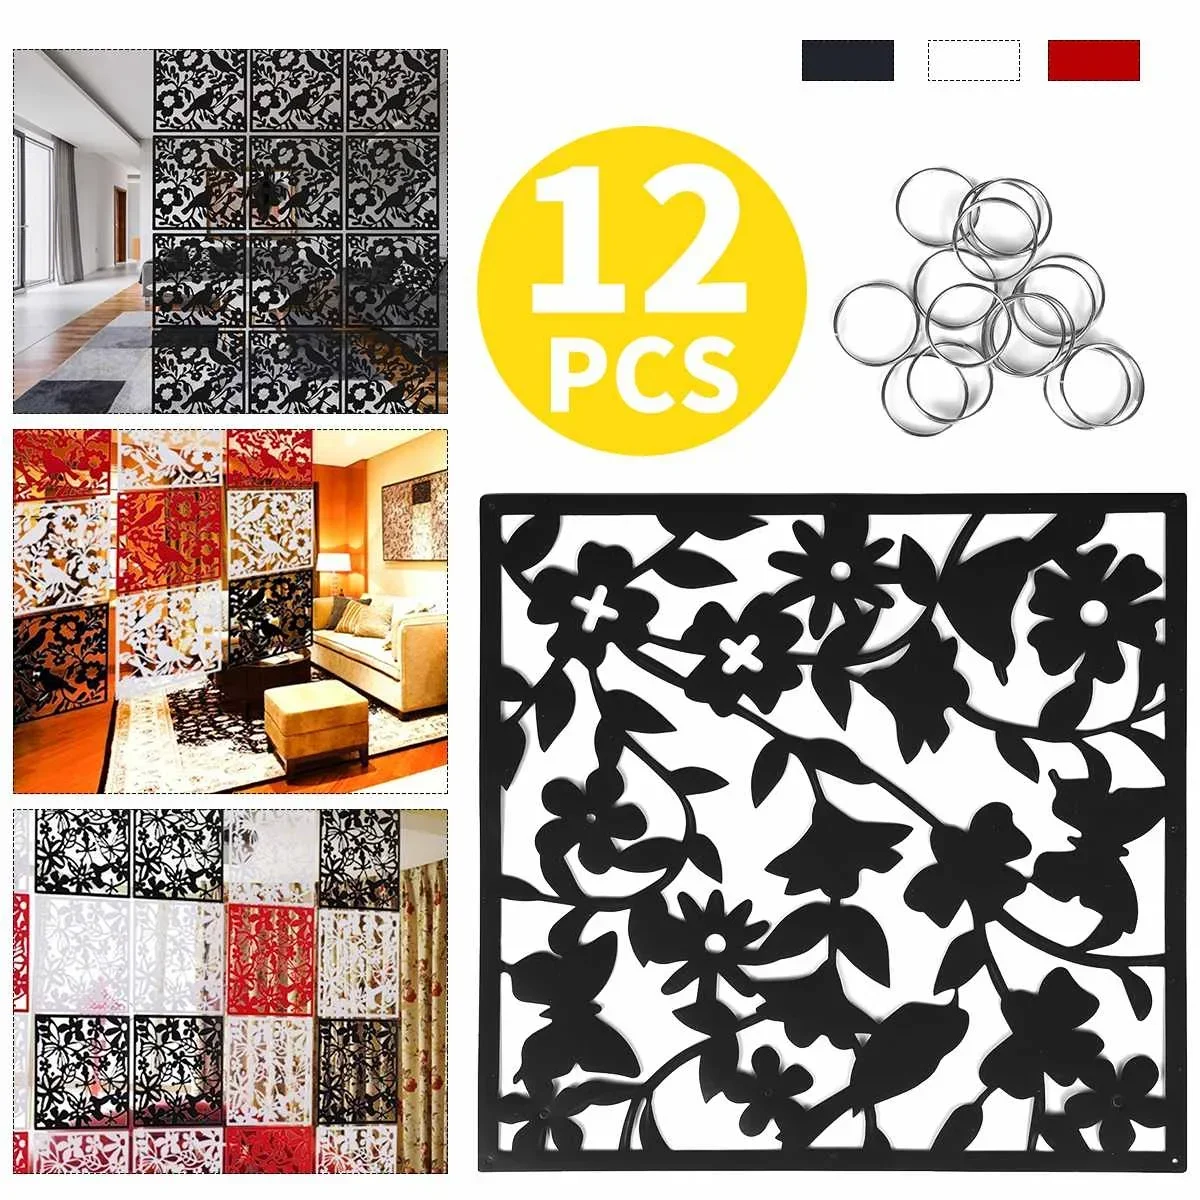 White/Black/Red 12pcs For Home Fashion Bird Flower Leaf Hanging Screen Partition Divider Panel Room Curtain Home